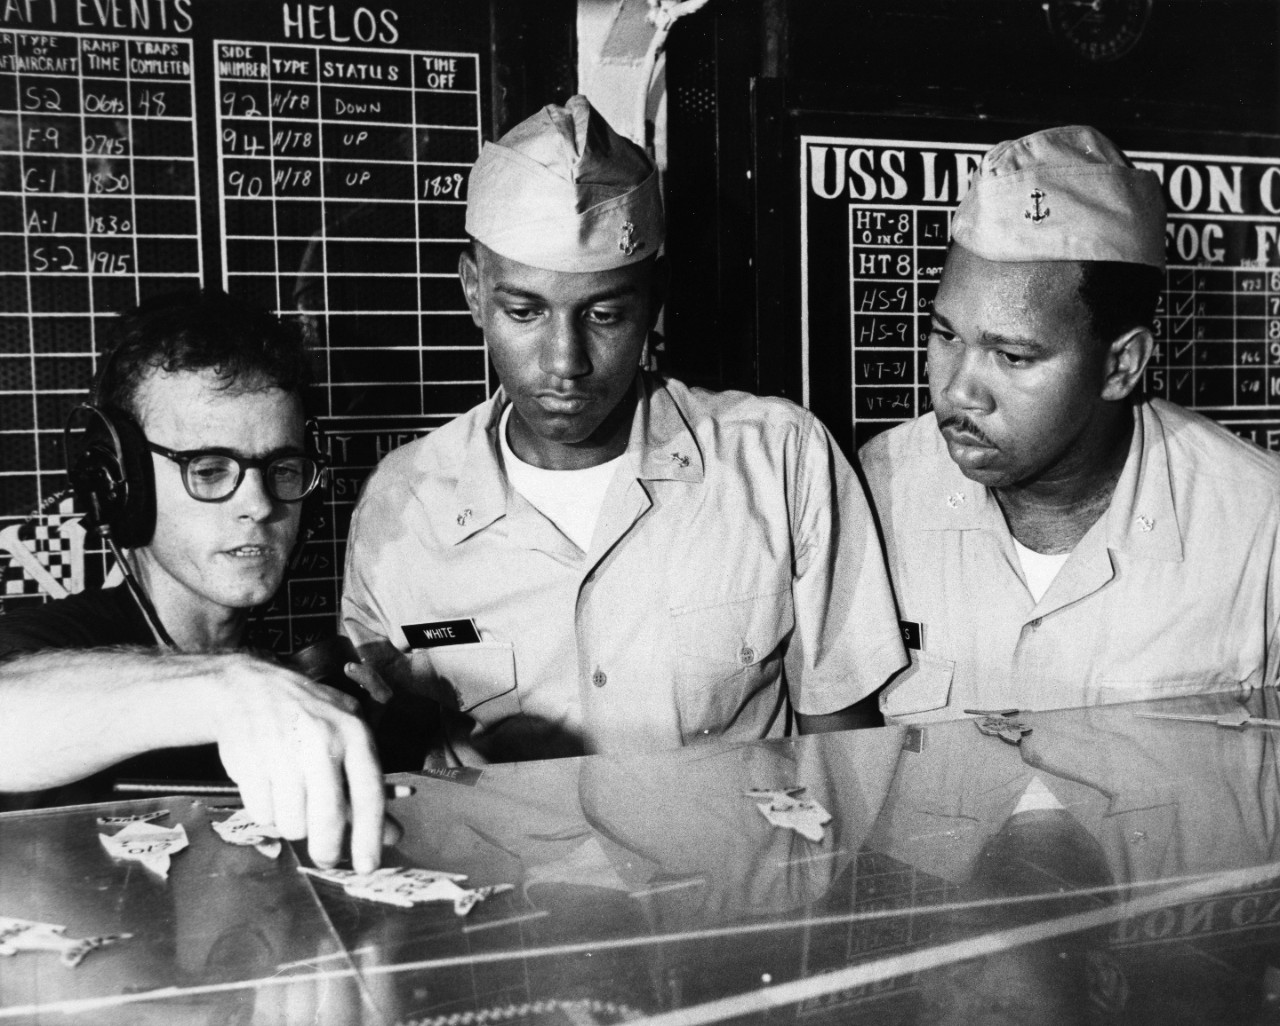 Naval Airman Daniel R. Highfill (left) explains flight deck operations to Midshipmen Charles E. White (center) and Robert E. Williams (right) aboard the aircraft carrier USS Lexington (CVS-16) in the Gulf of Mexico. The midshipmen were part of a group from Prairie View A & M College who were aboard for two weeks of active duty training.